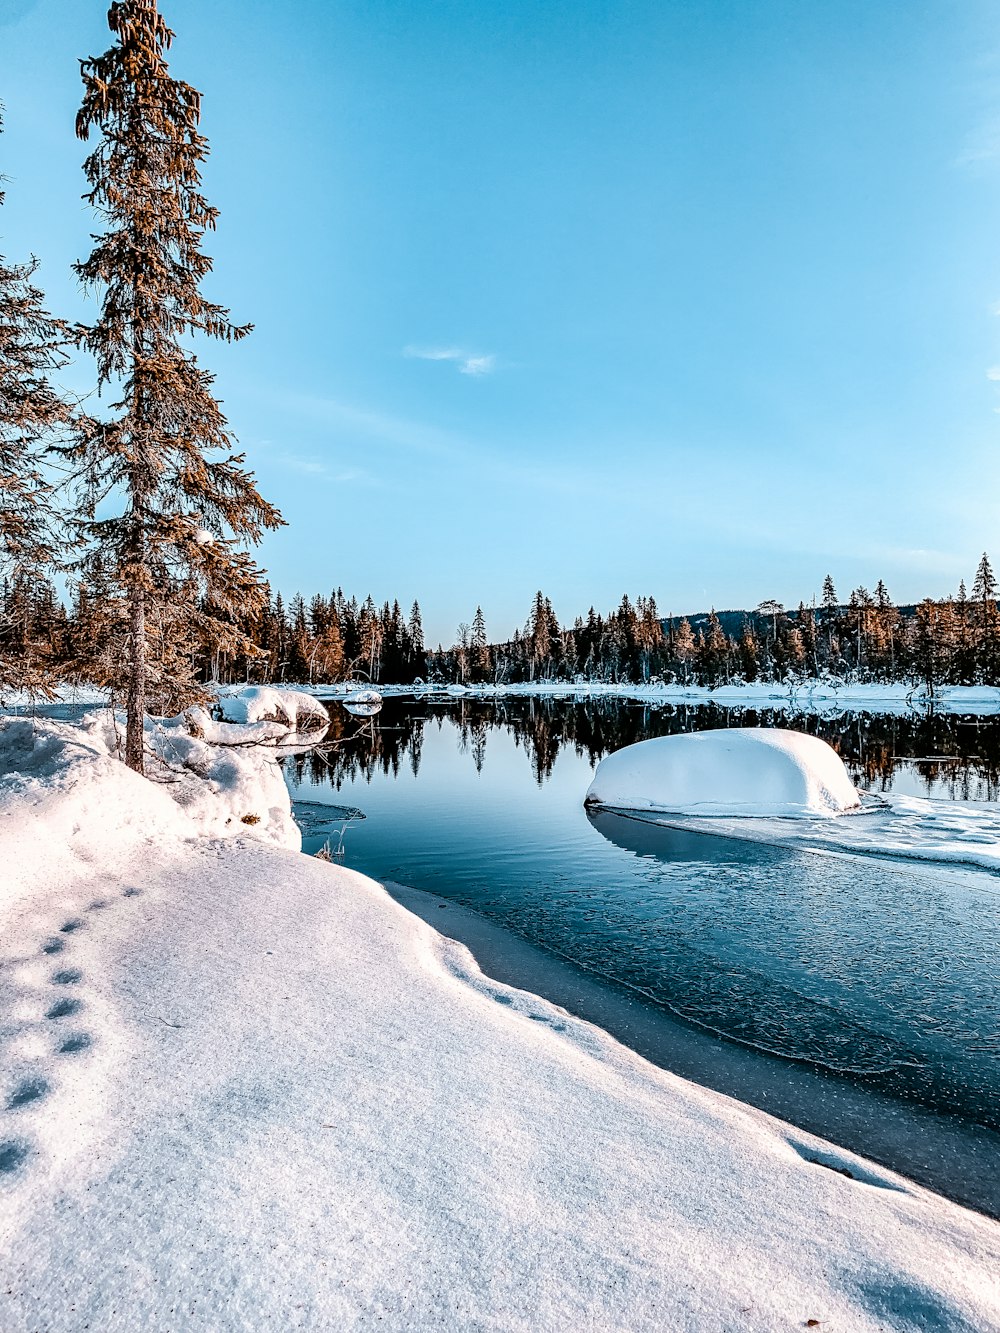 white boat on snow covered ground near trees during daytime